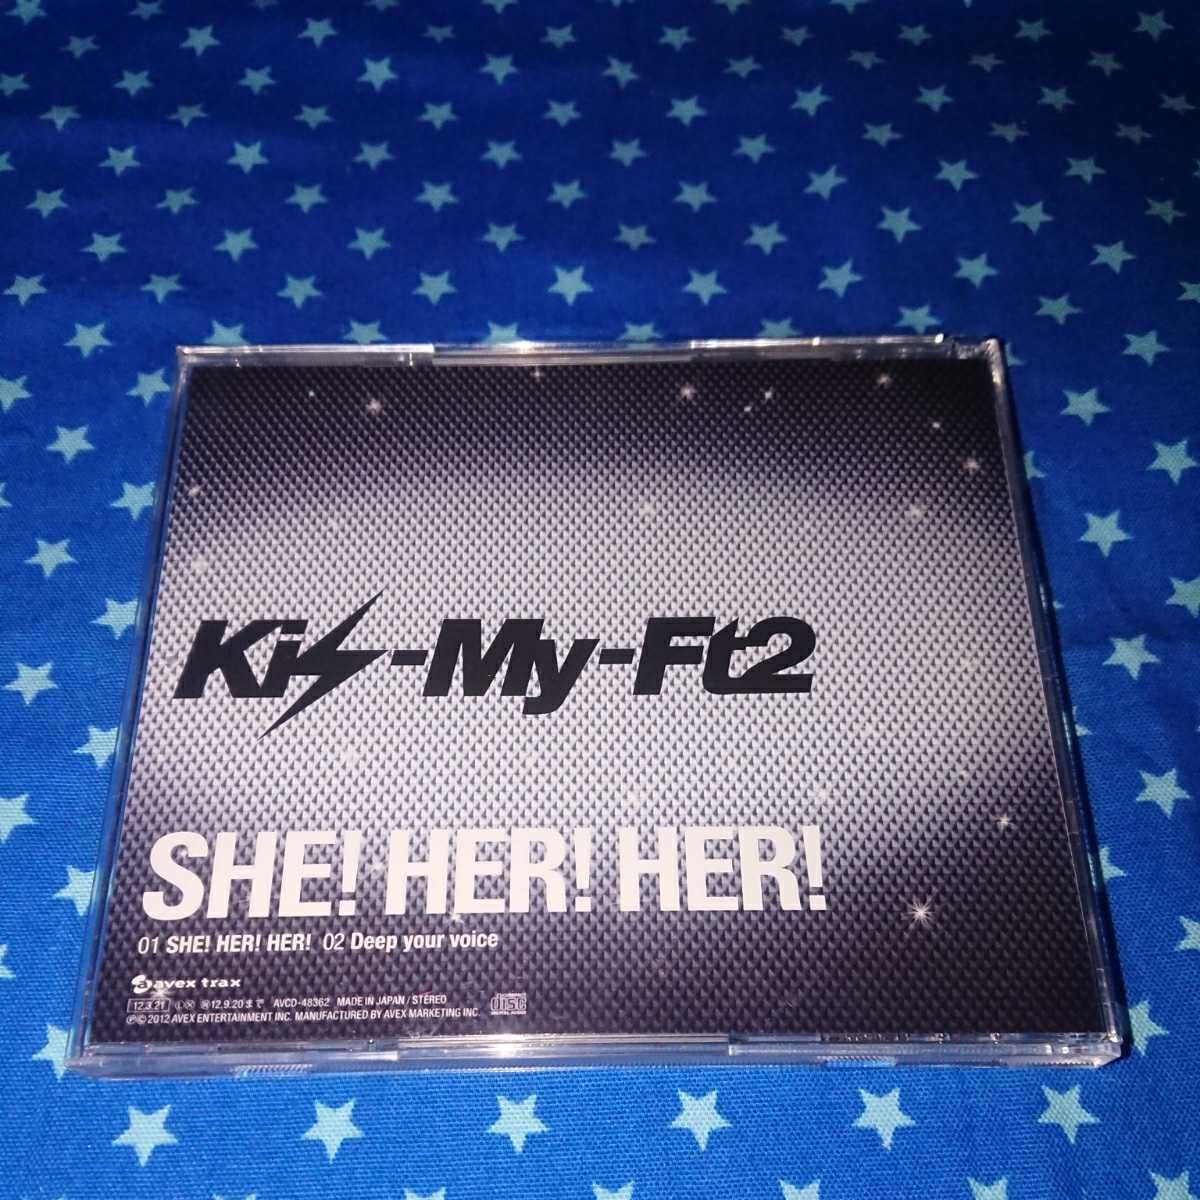 【Kis-My-Ft2】SHE! HER! HER! 通常盤 CD 初回出荷分限定 キス顔ミニポスター《宮田俊哉》付き　 ＊同梱可＊_画像2